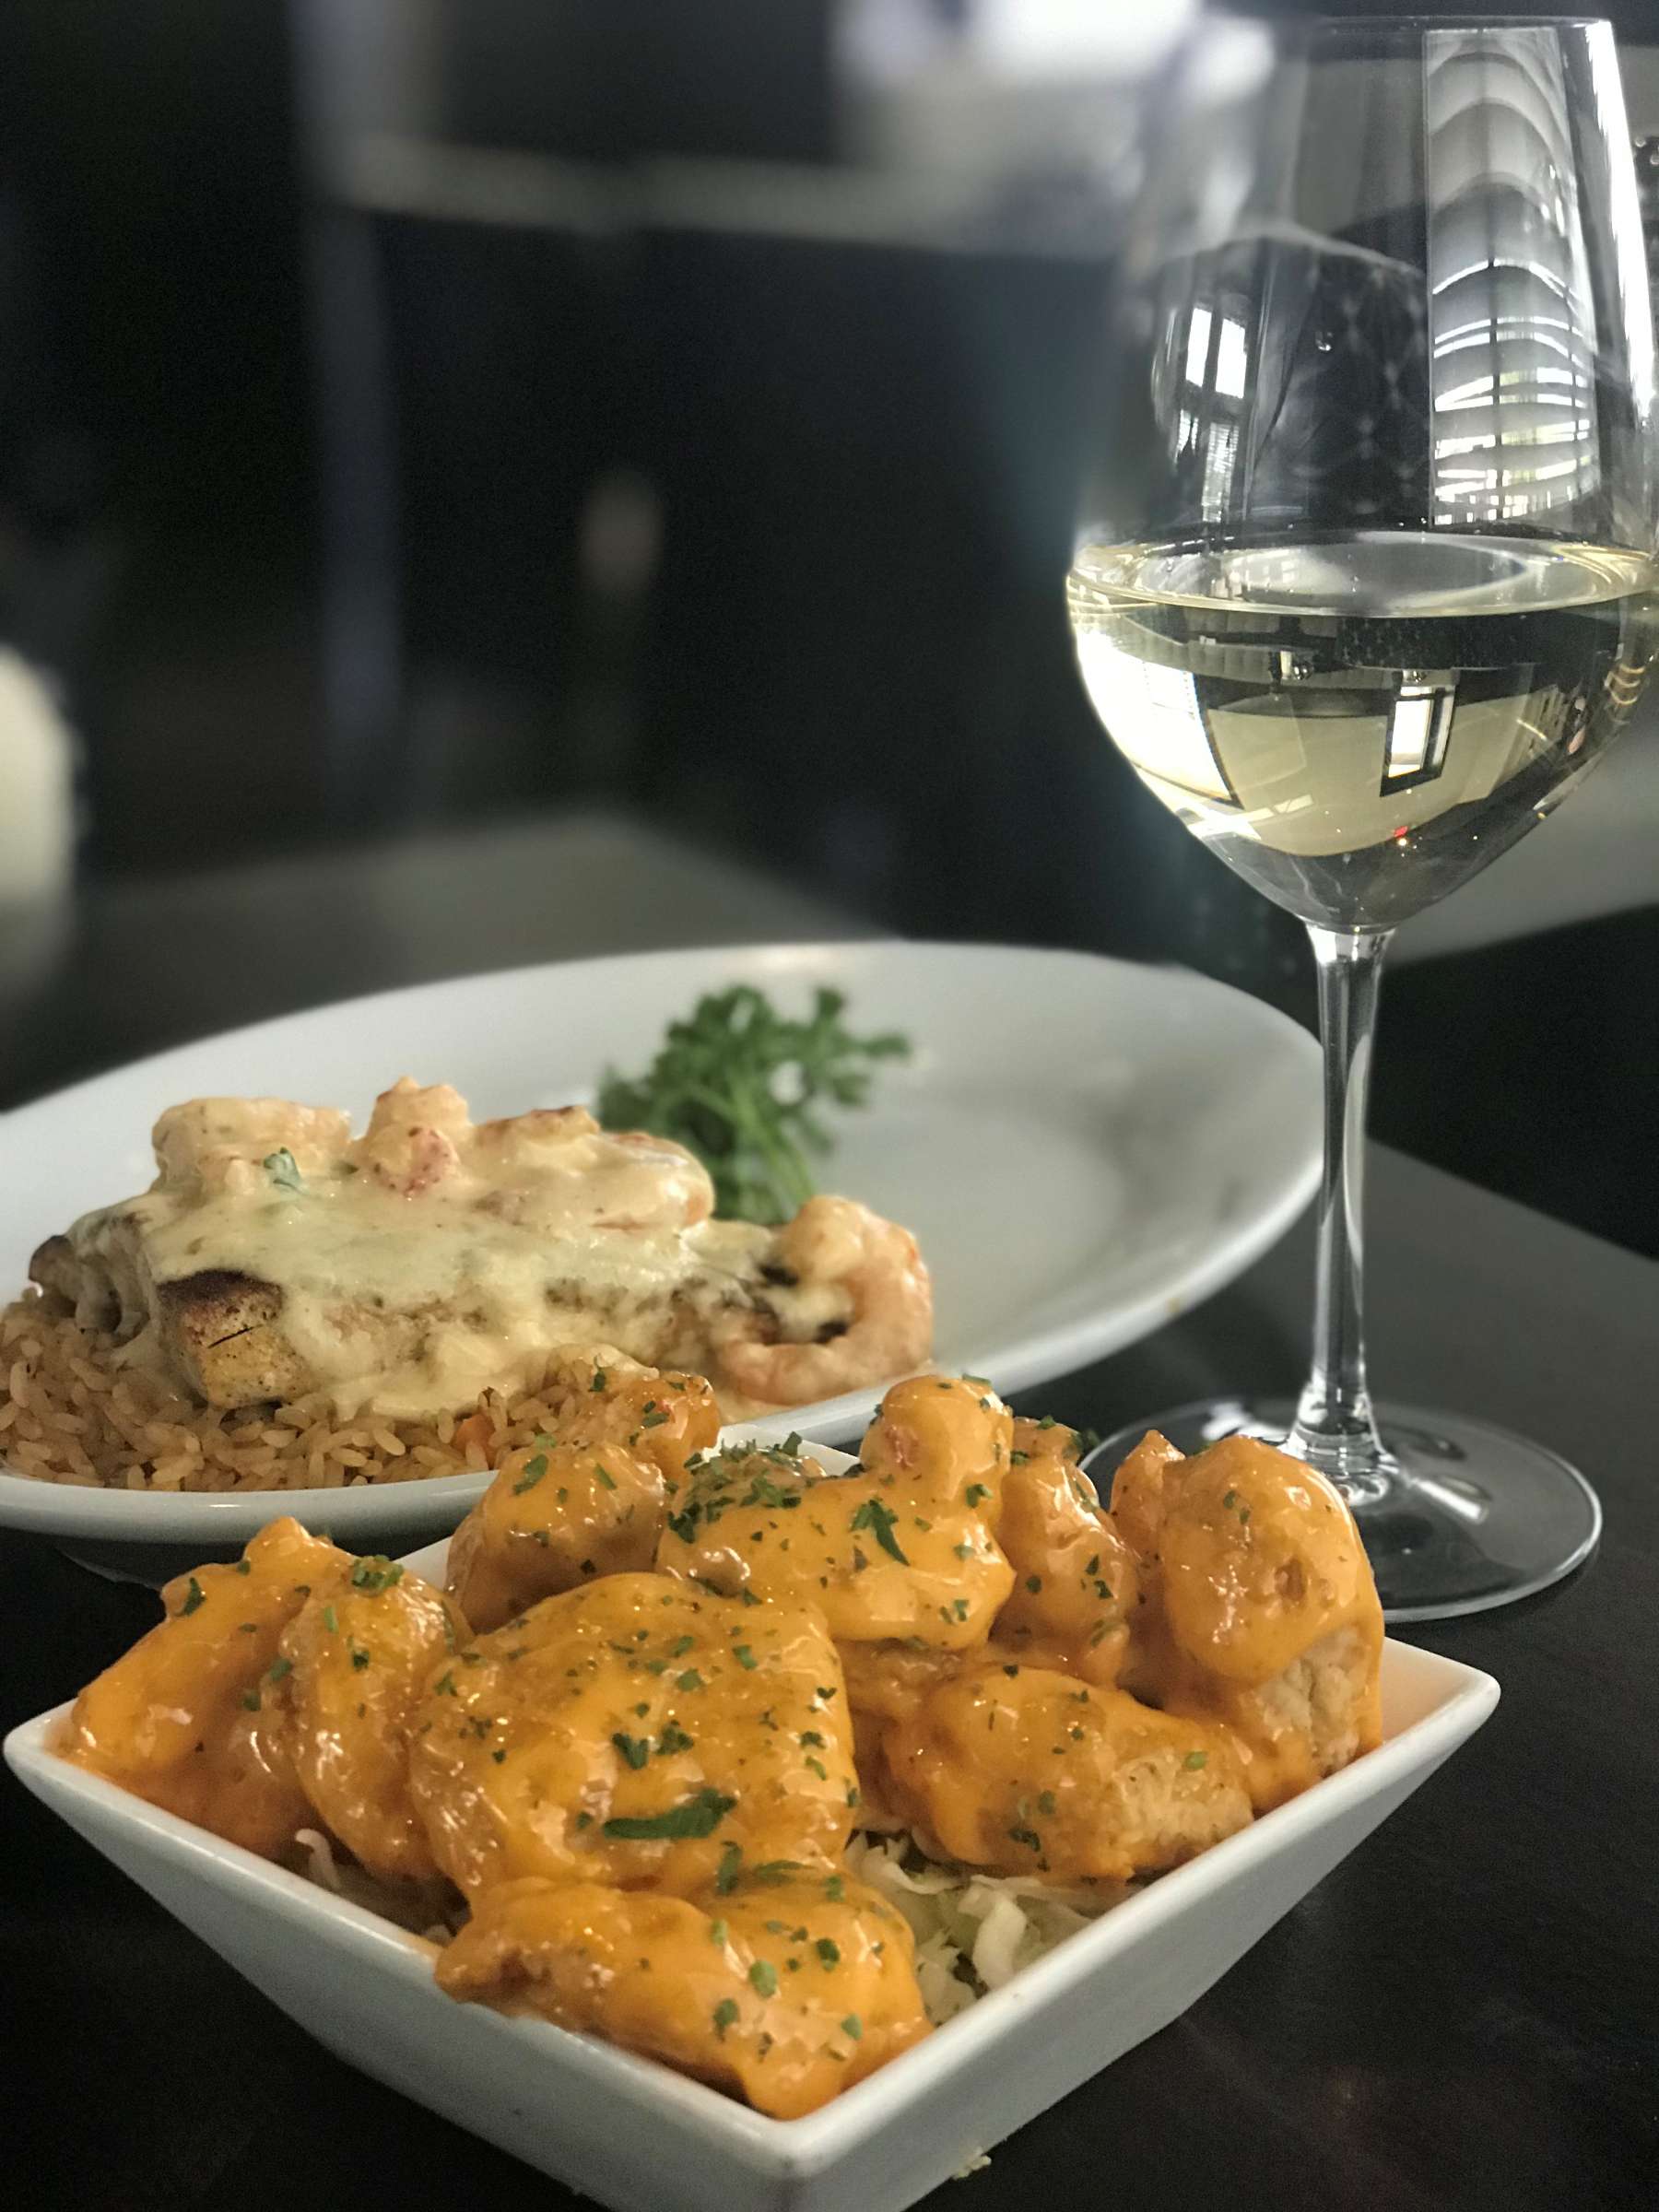 Firecracker shrimp served with a glass of wine.